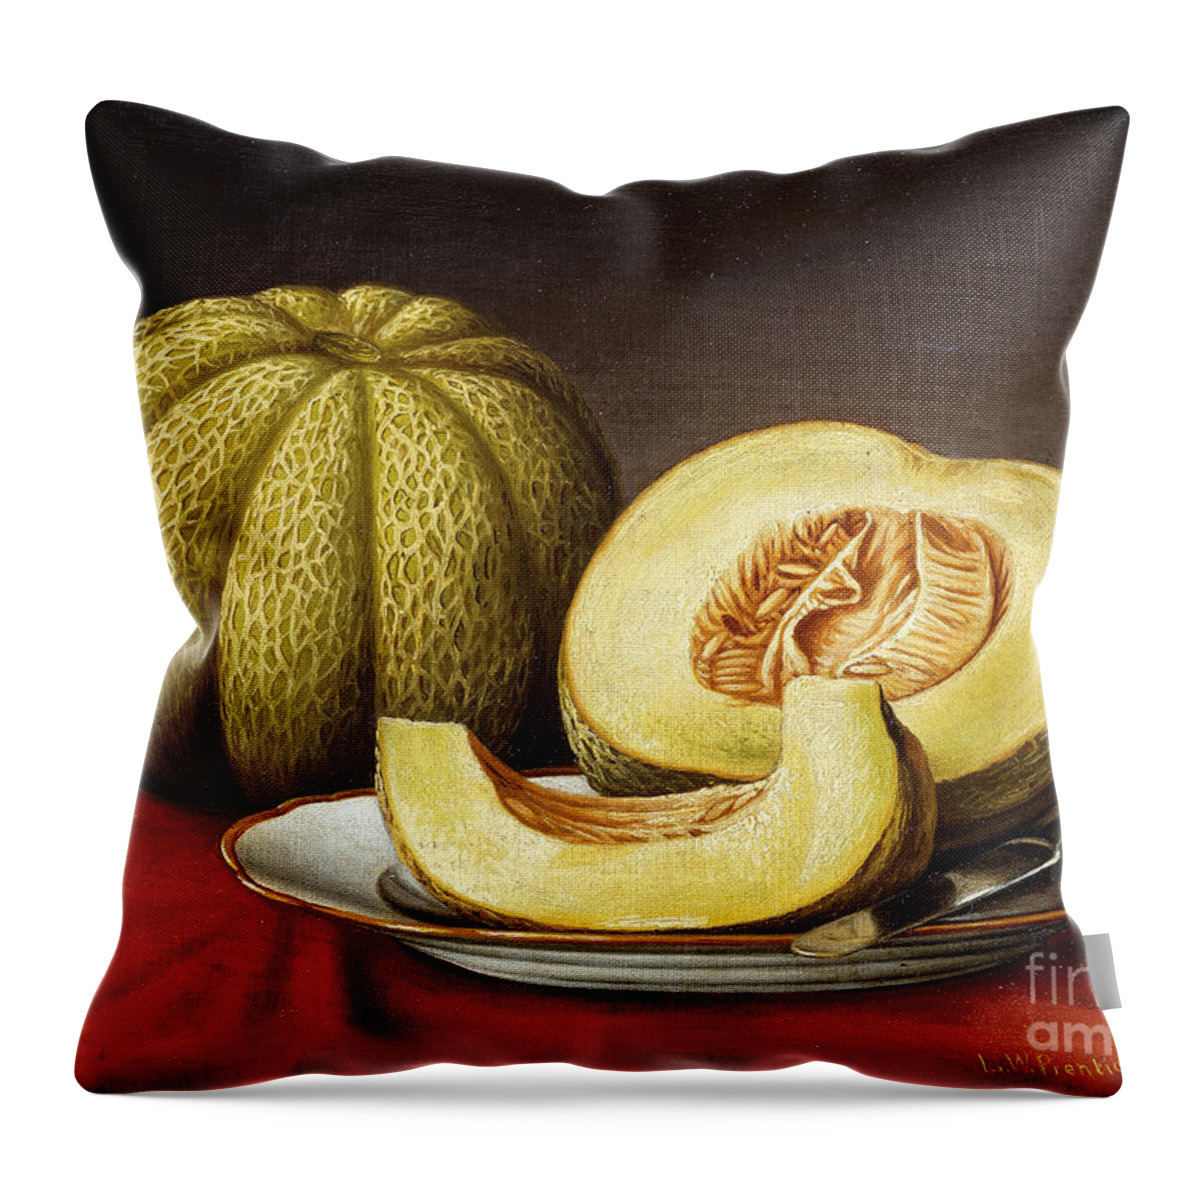 Fruit Throw Pillow featuring the painting Cantaloupe by Levi Wells Prentice